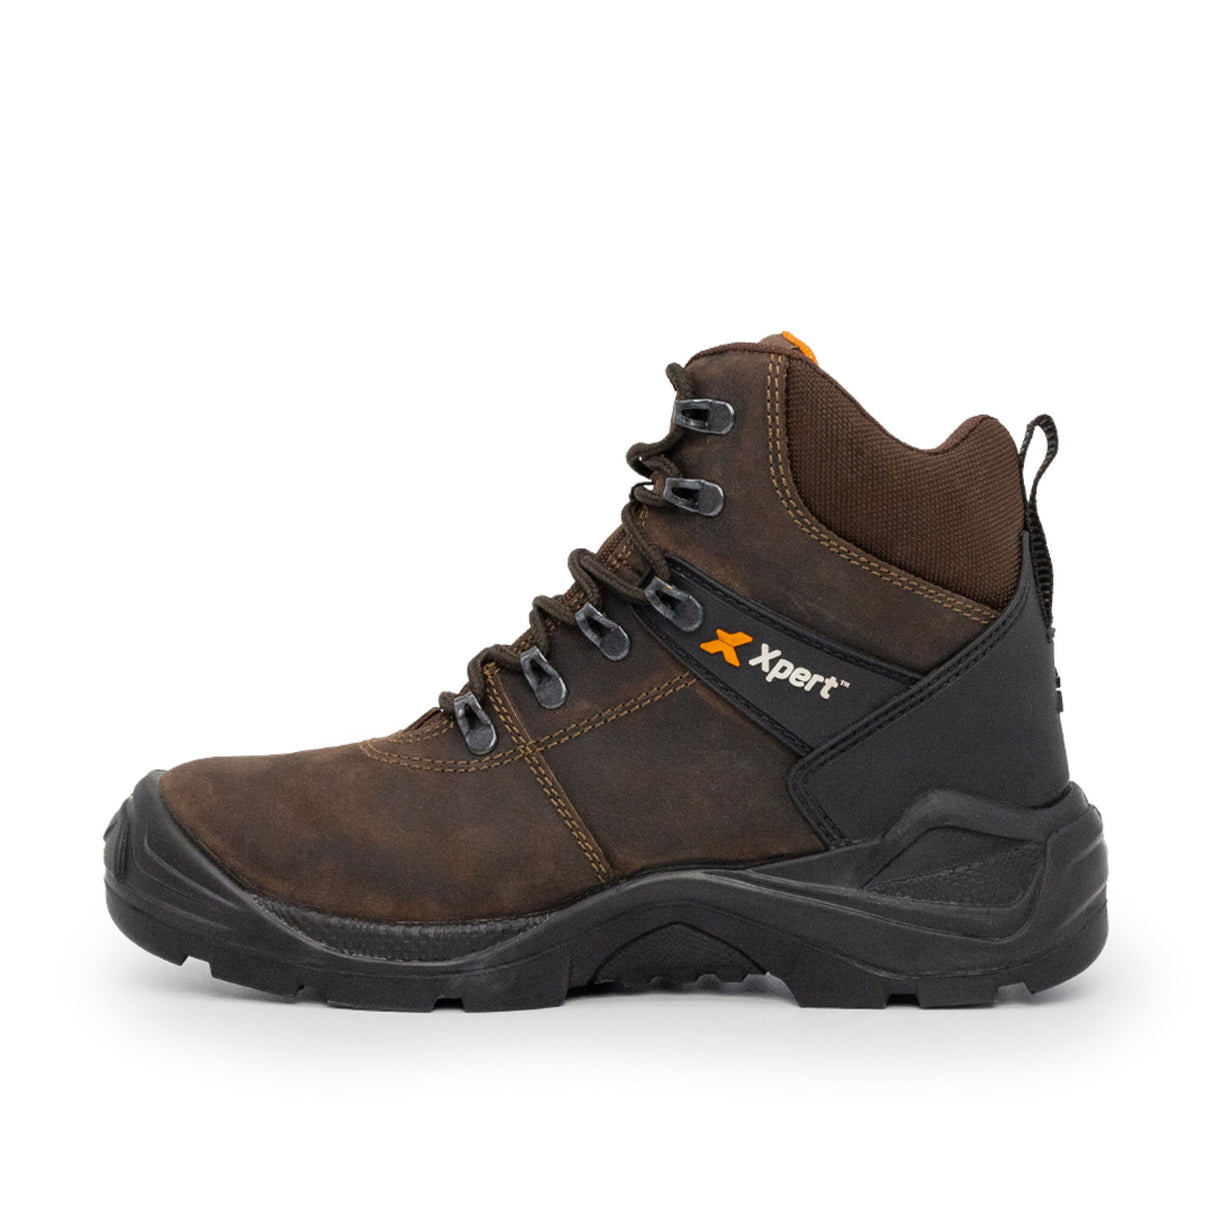 Xpert Typhoon Waterproof S3 Safety Boot Brown - Farming Parts